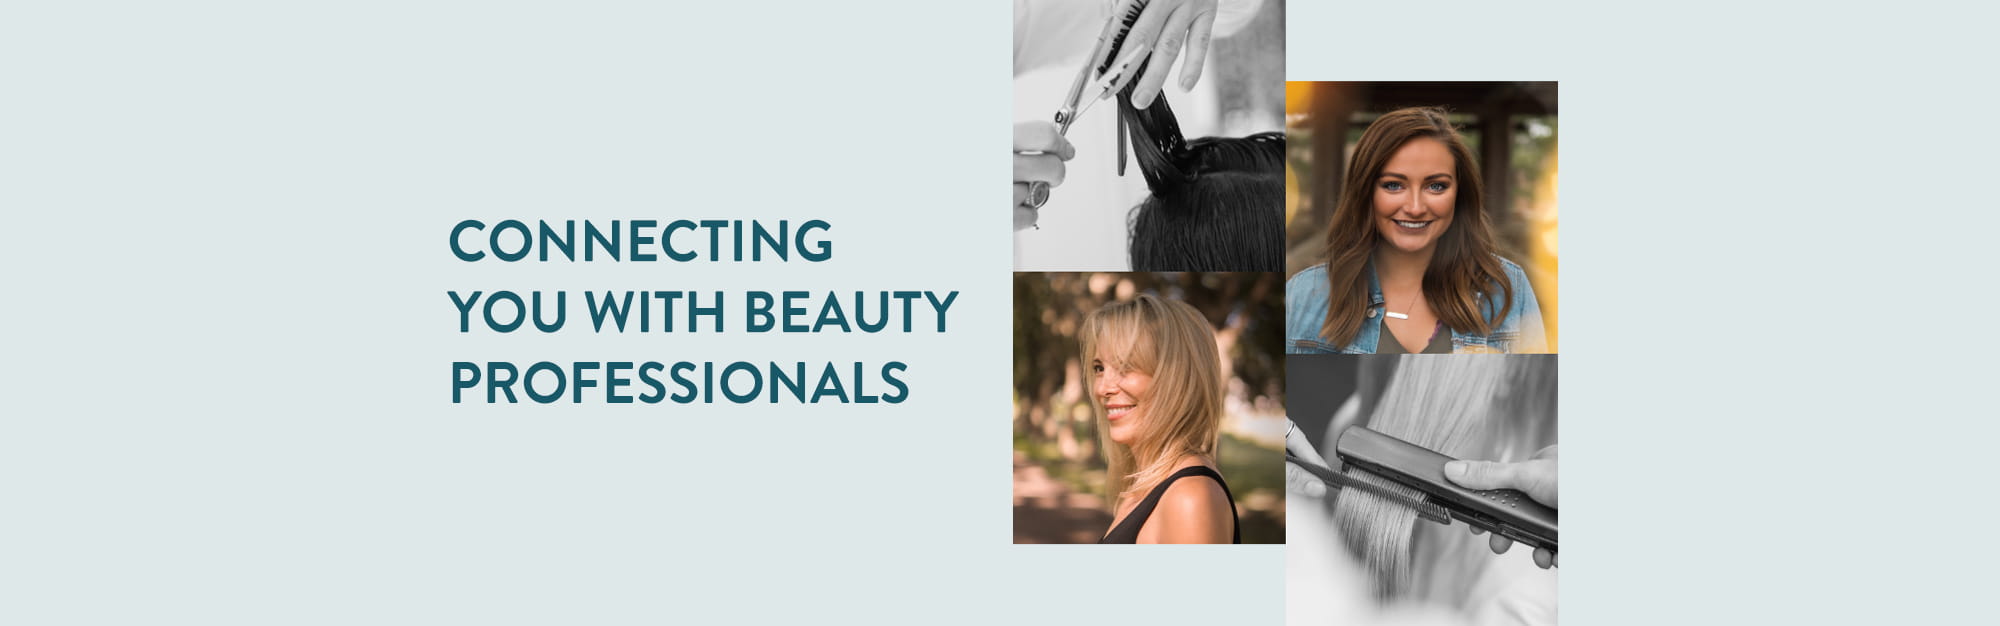 Connecting you with beauty professionals